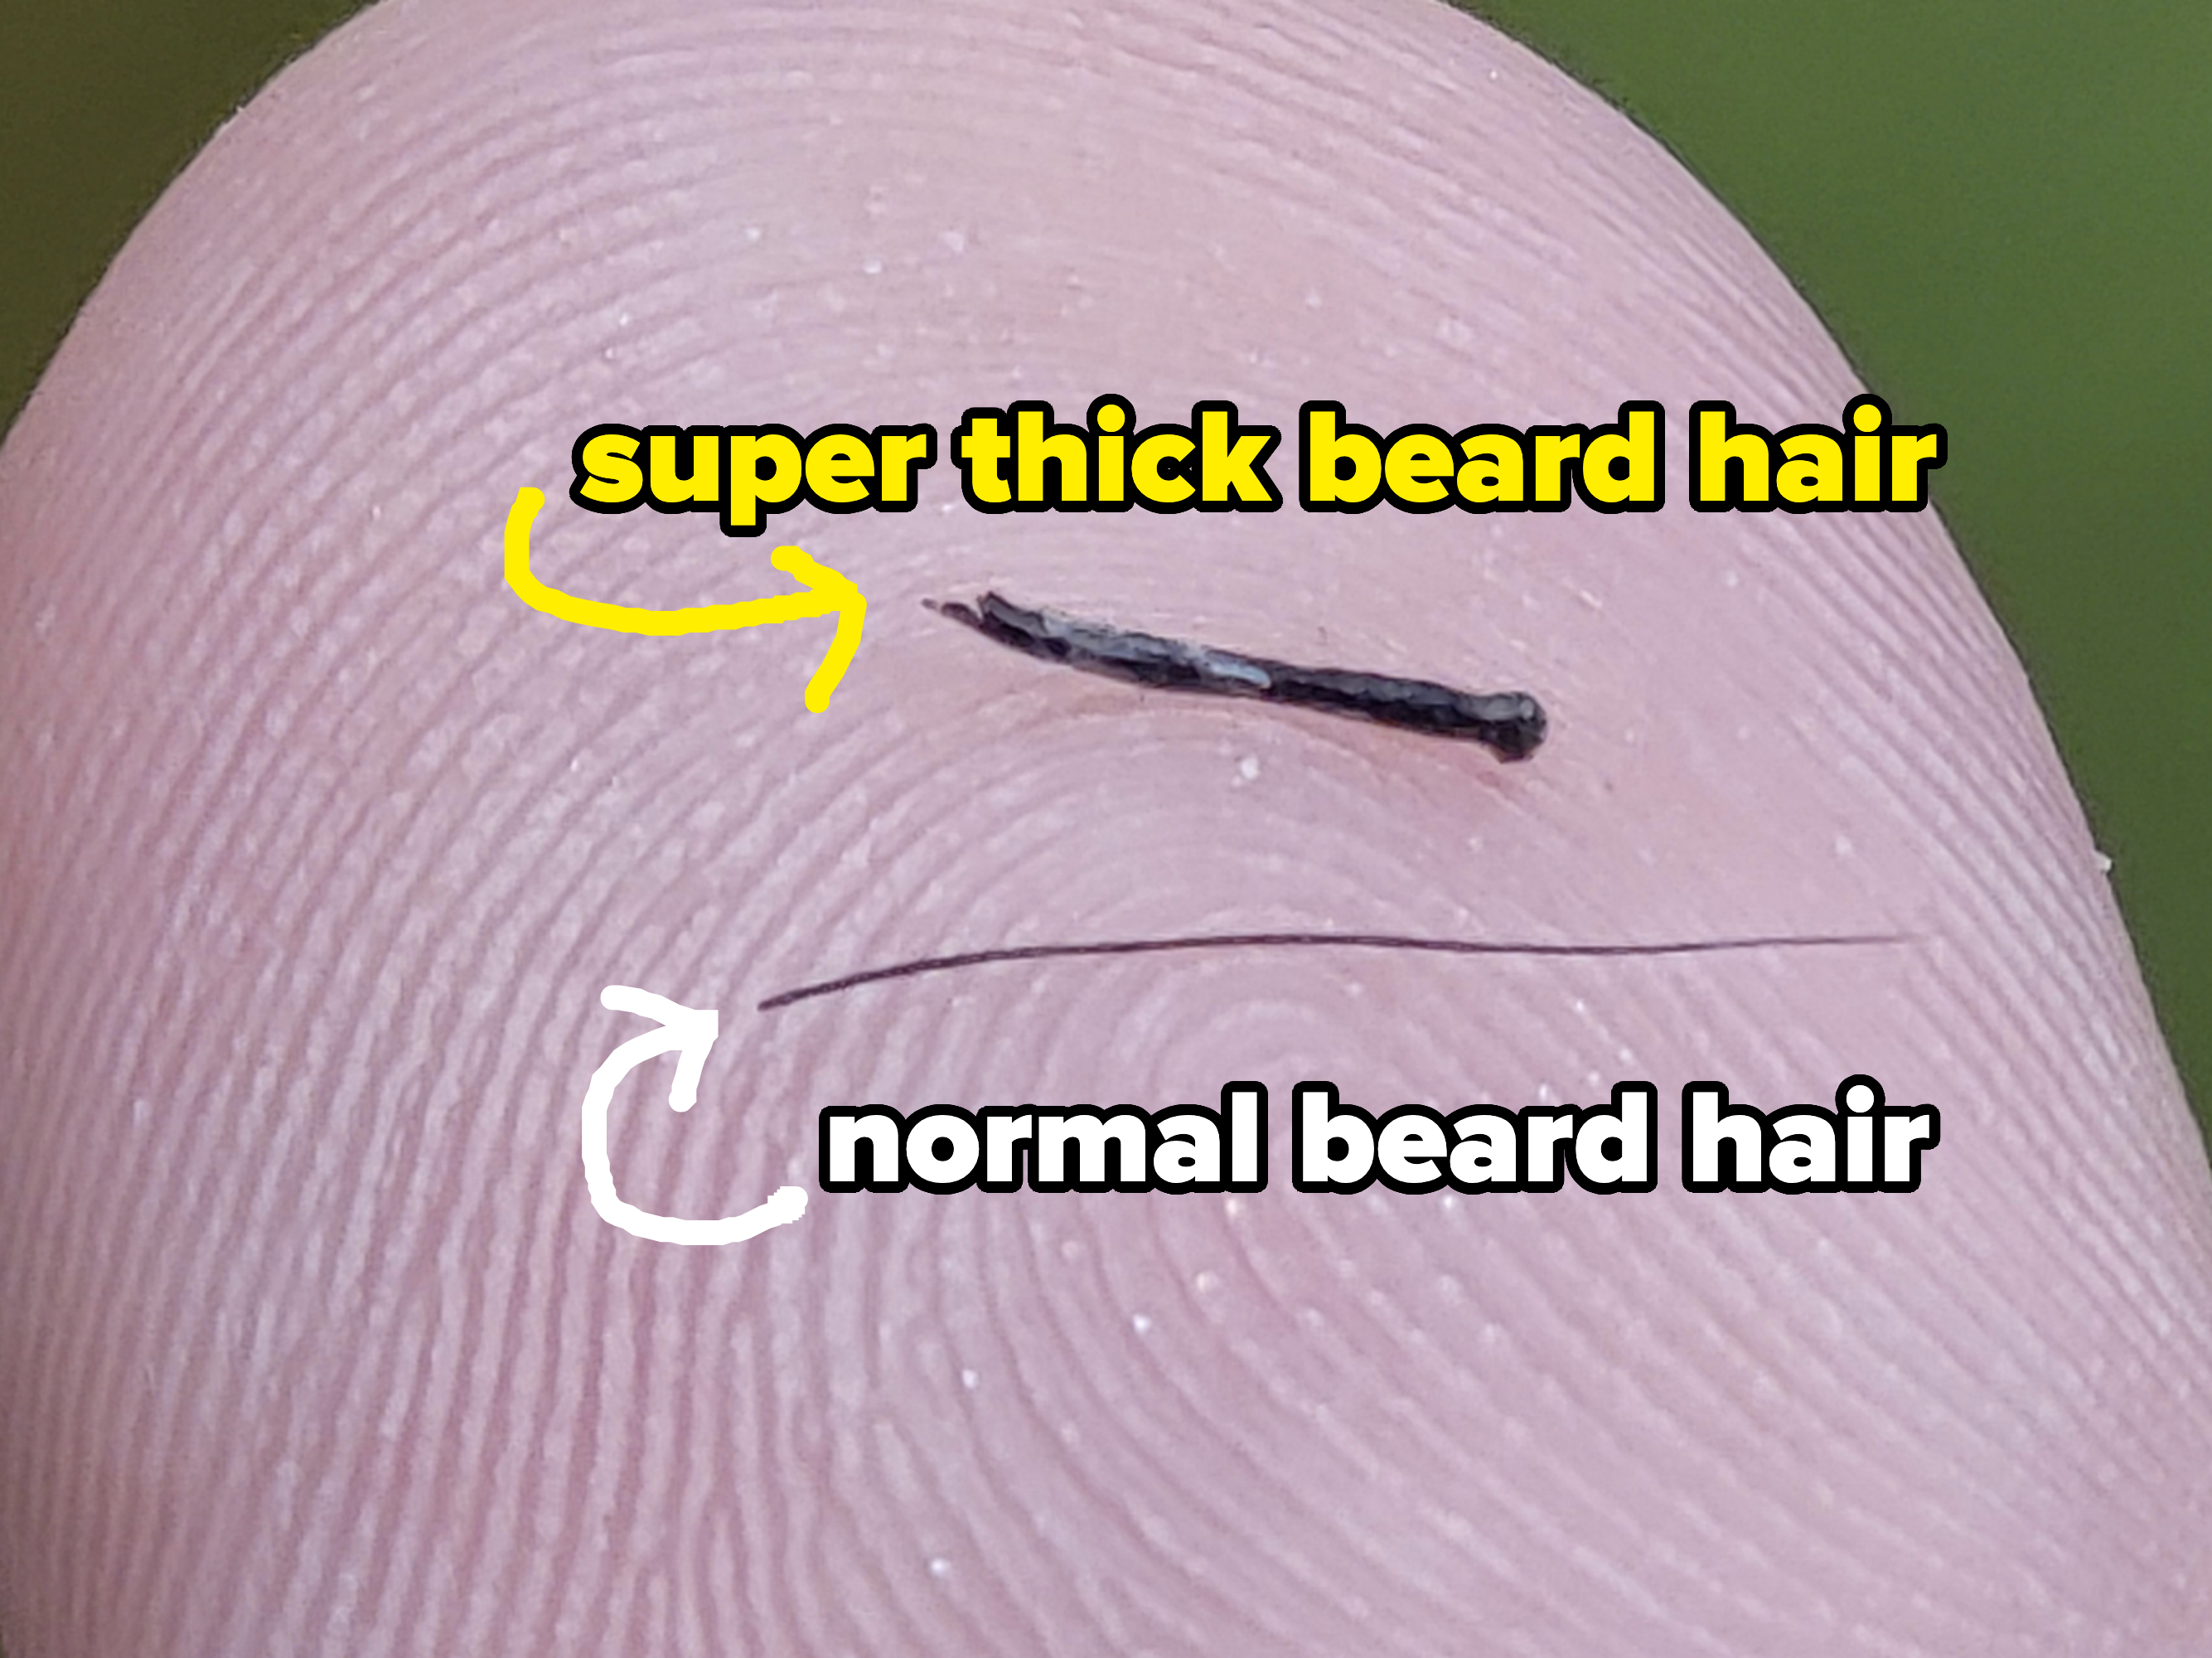 the thick beard hair put up against a regular beard hair and it&#x27;s so much thicker